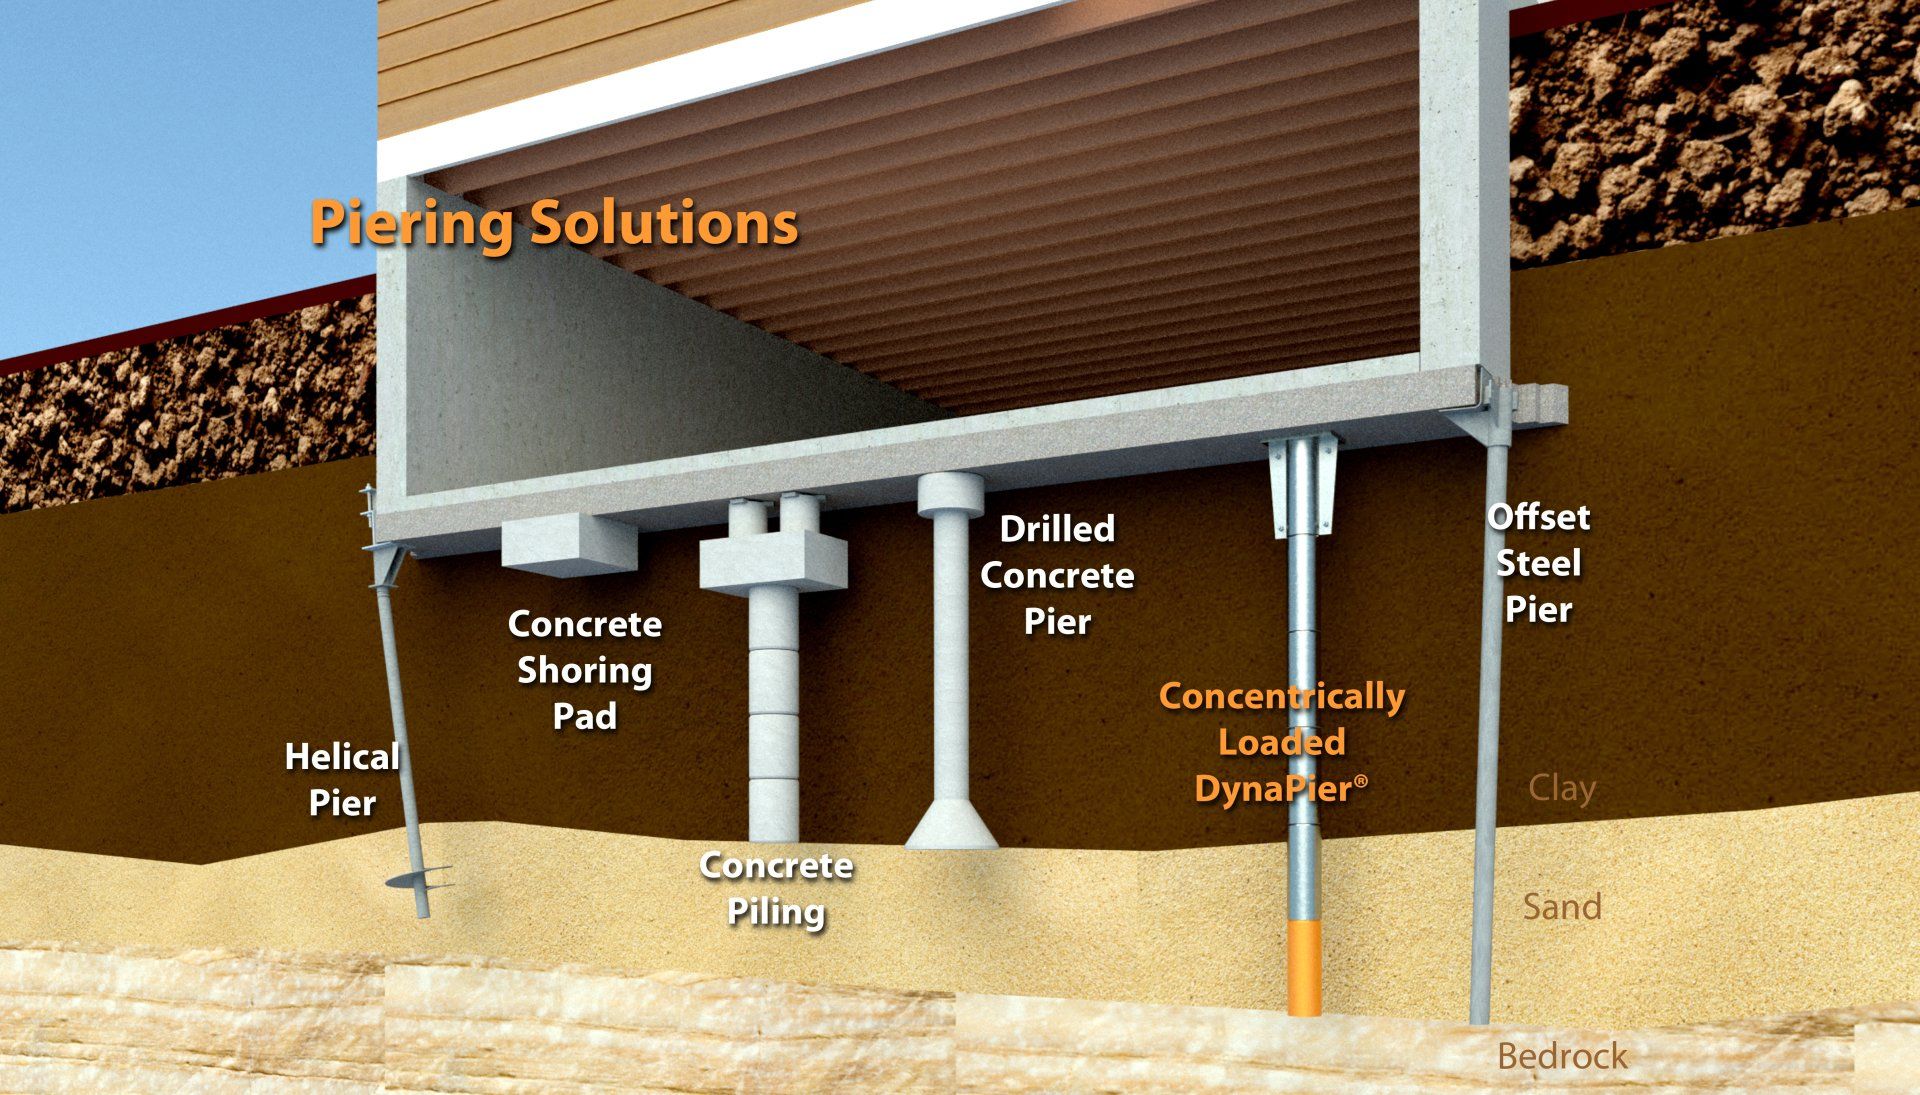 Foundation Piering Solutions Infographic